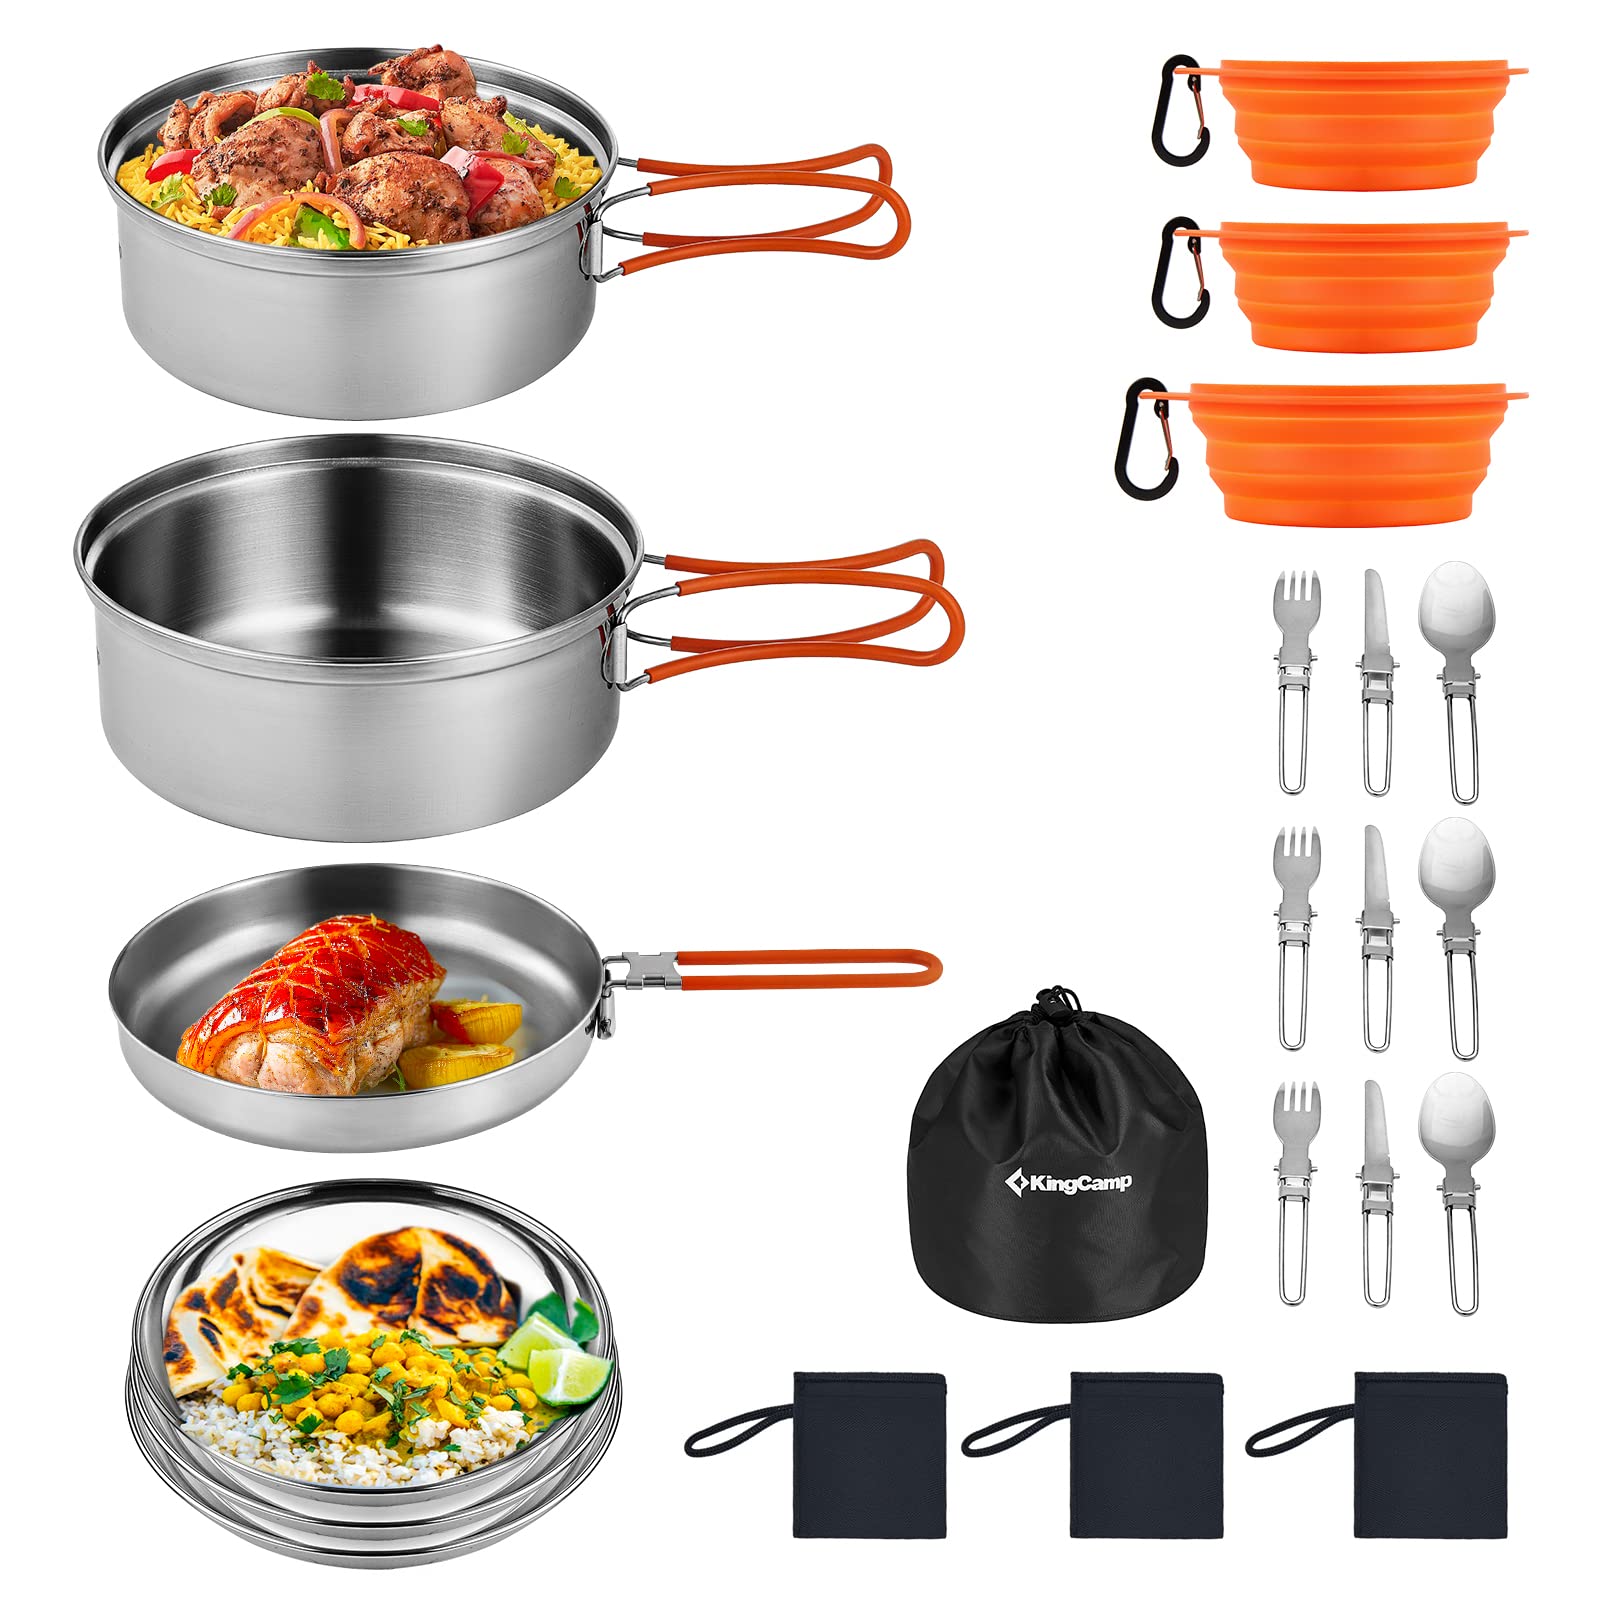 3 person camping cookware